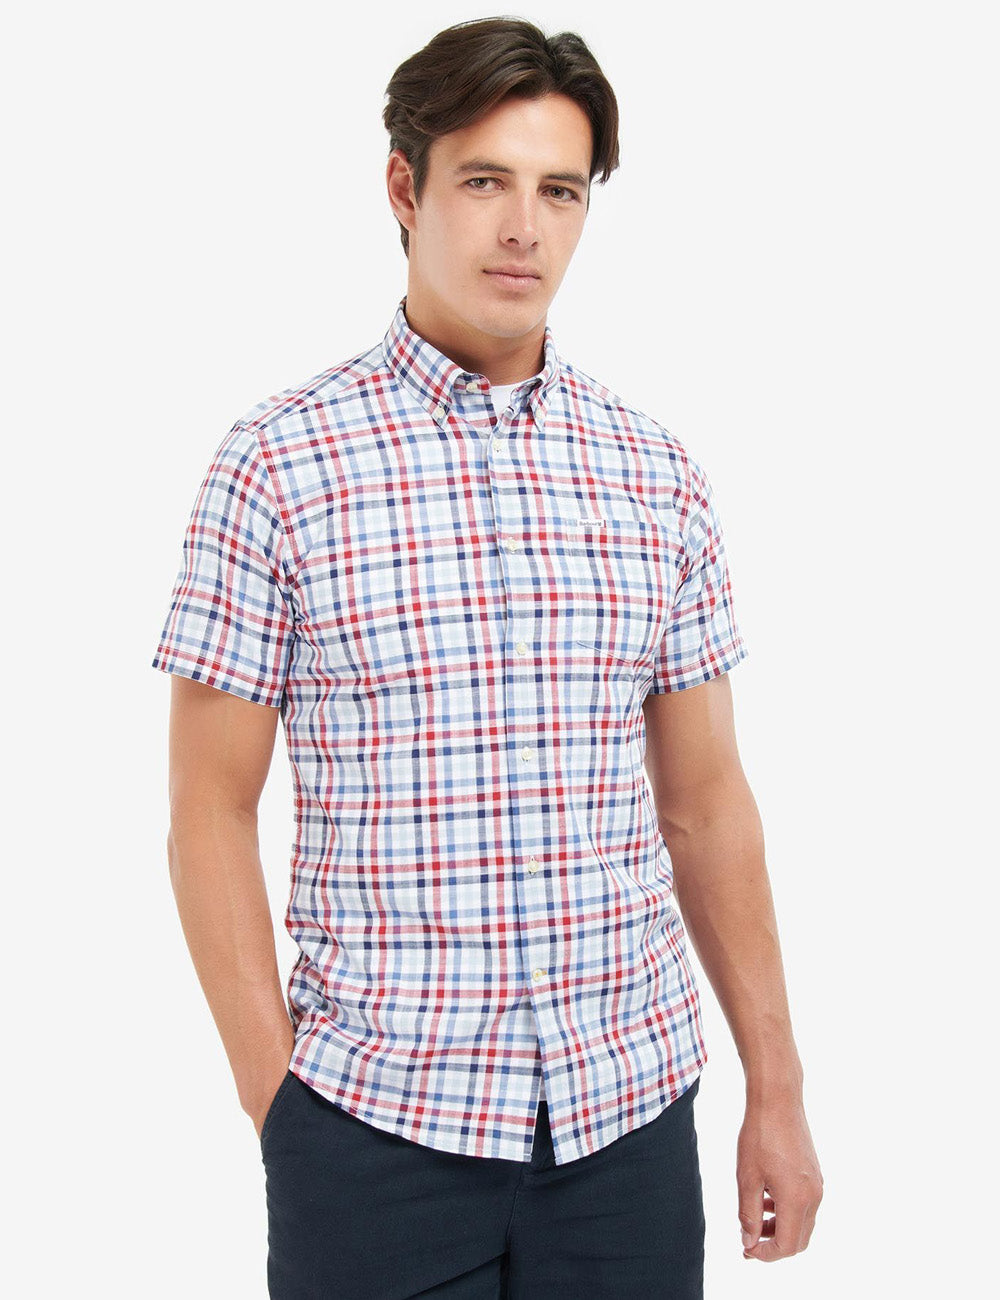 Man wearing the Kinson Shirt from Barbour